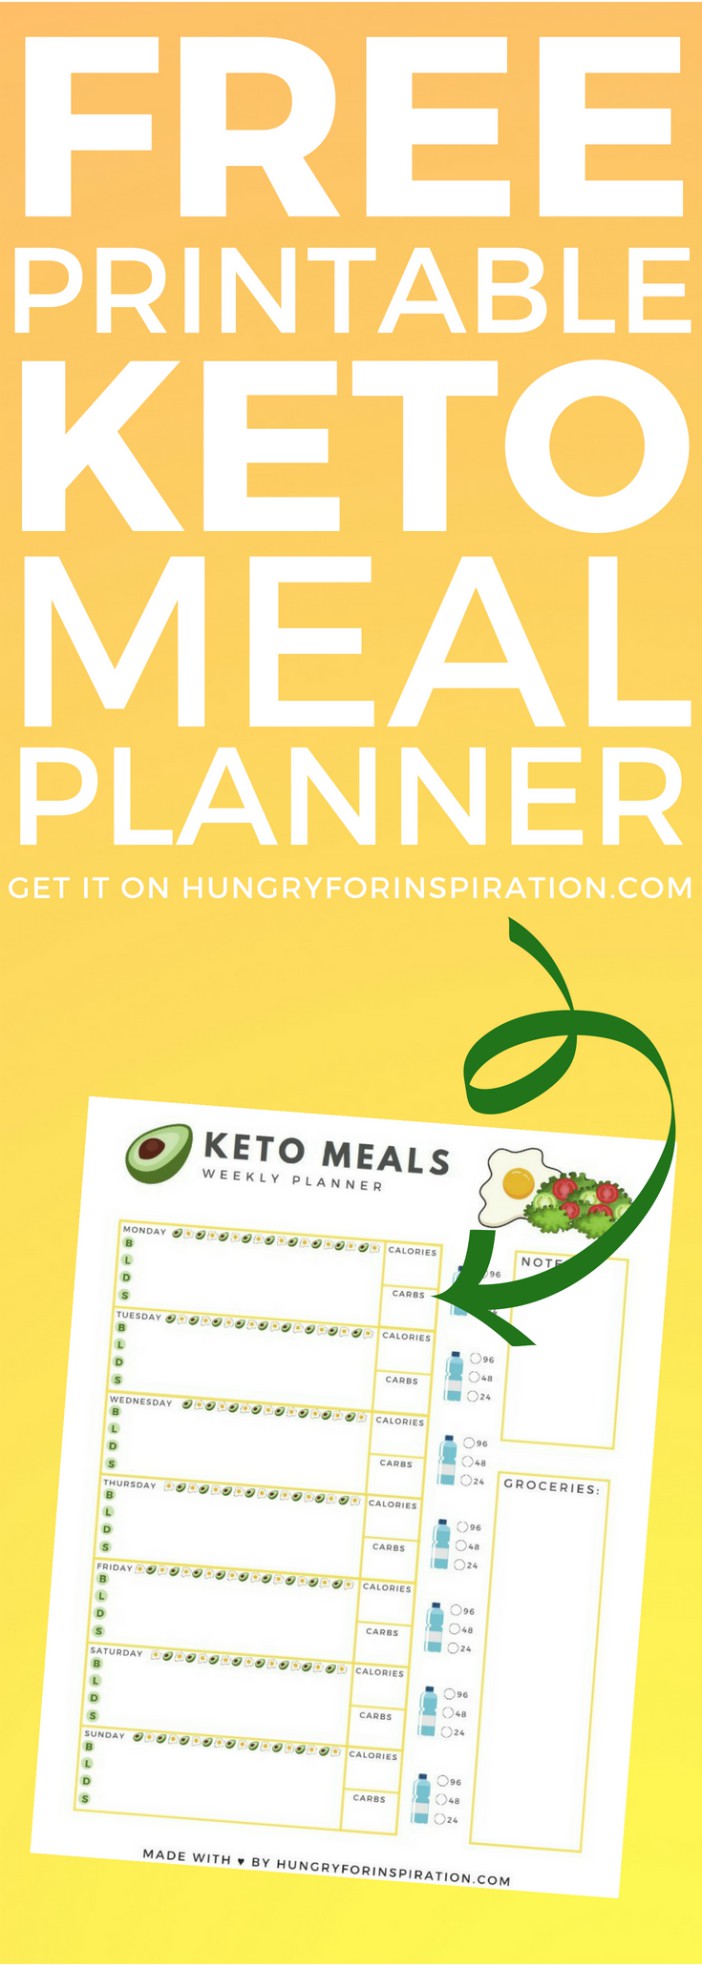 Keto Meal Planner Template from hungryforinspiration.com